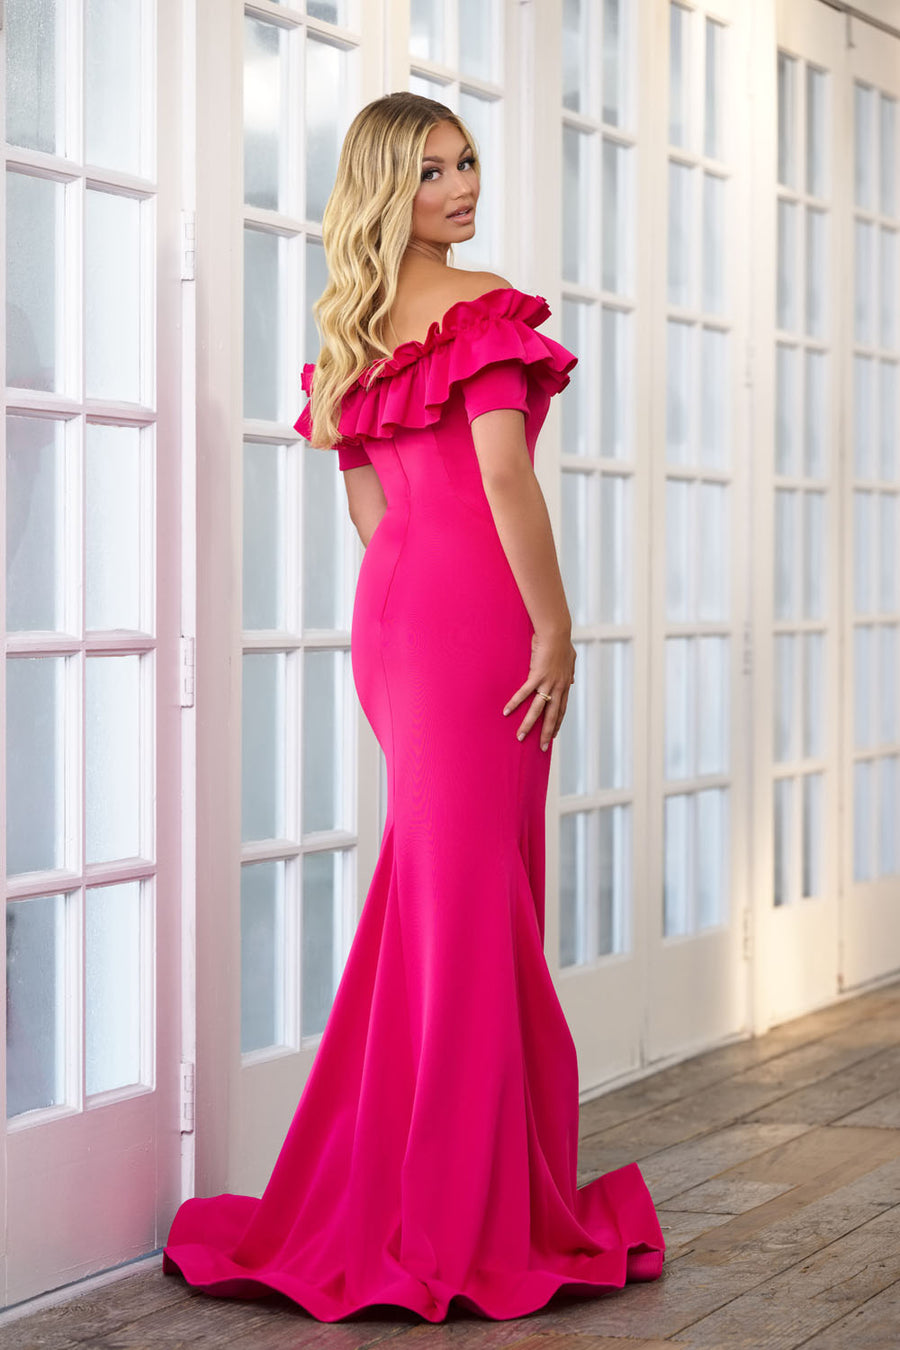 Ava Presley 39305 prom dress images.  Ava Presley 39305 is available in these colors: Hot Pink, Emerald.